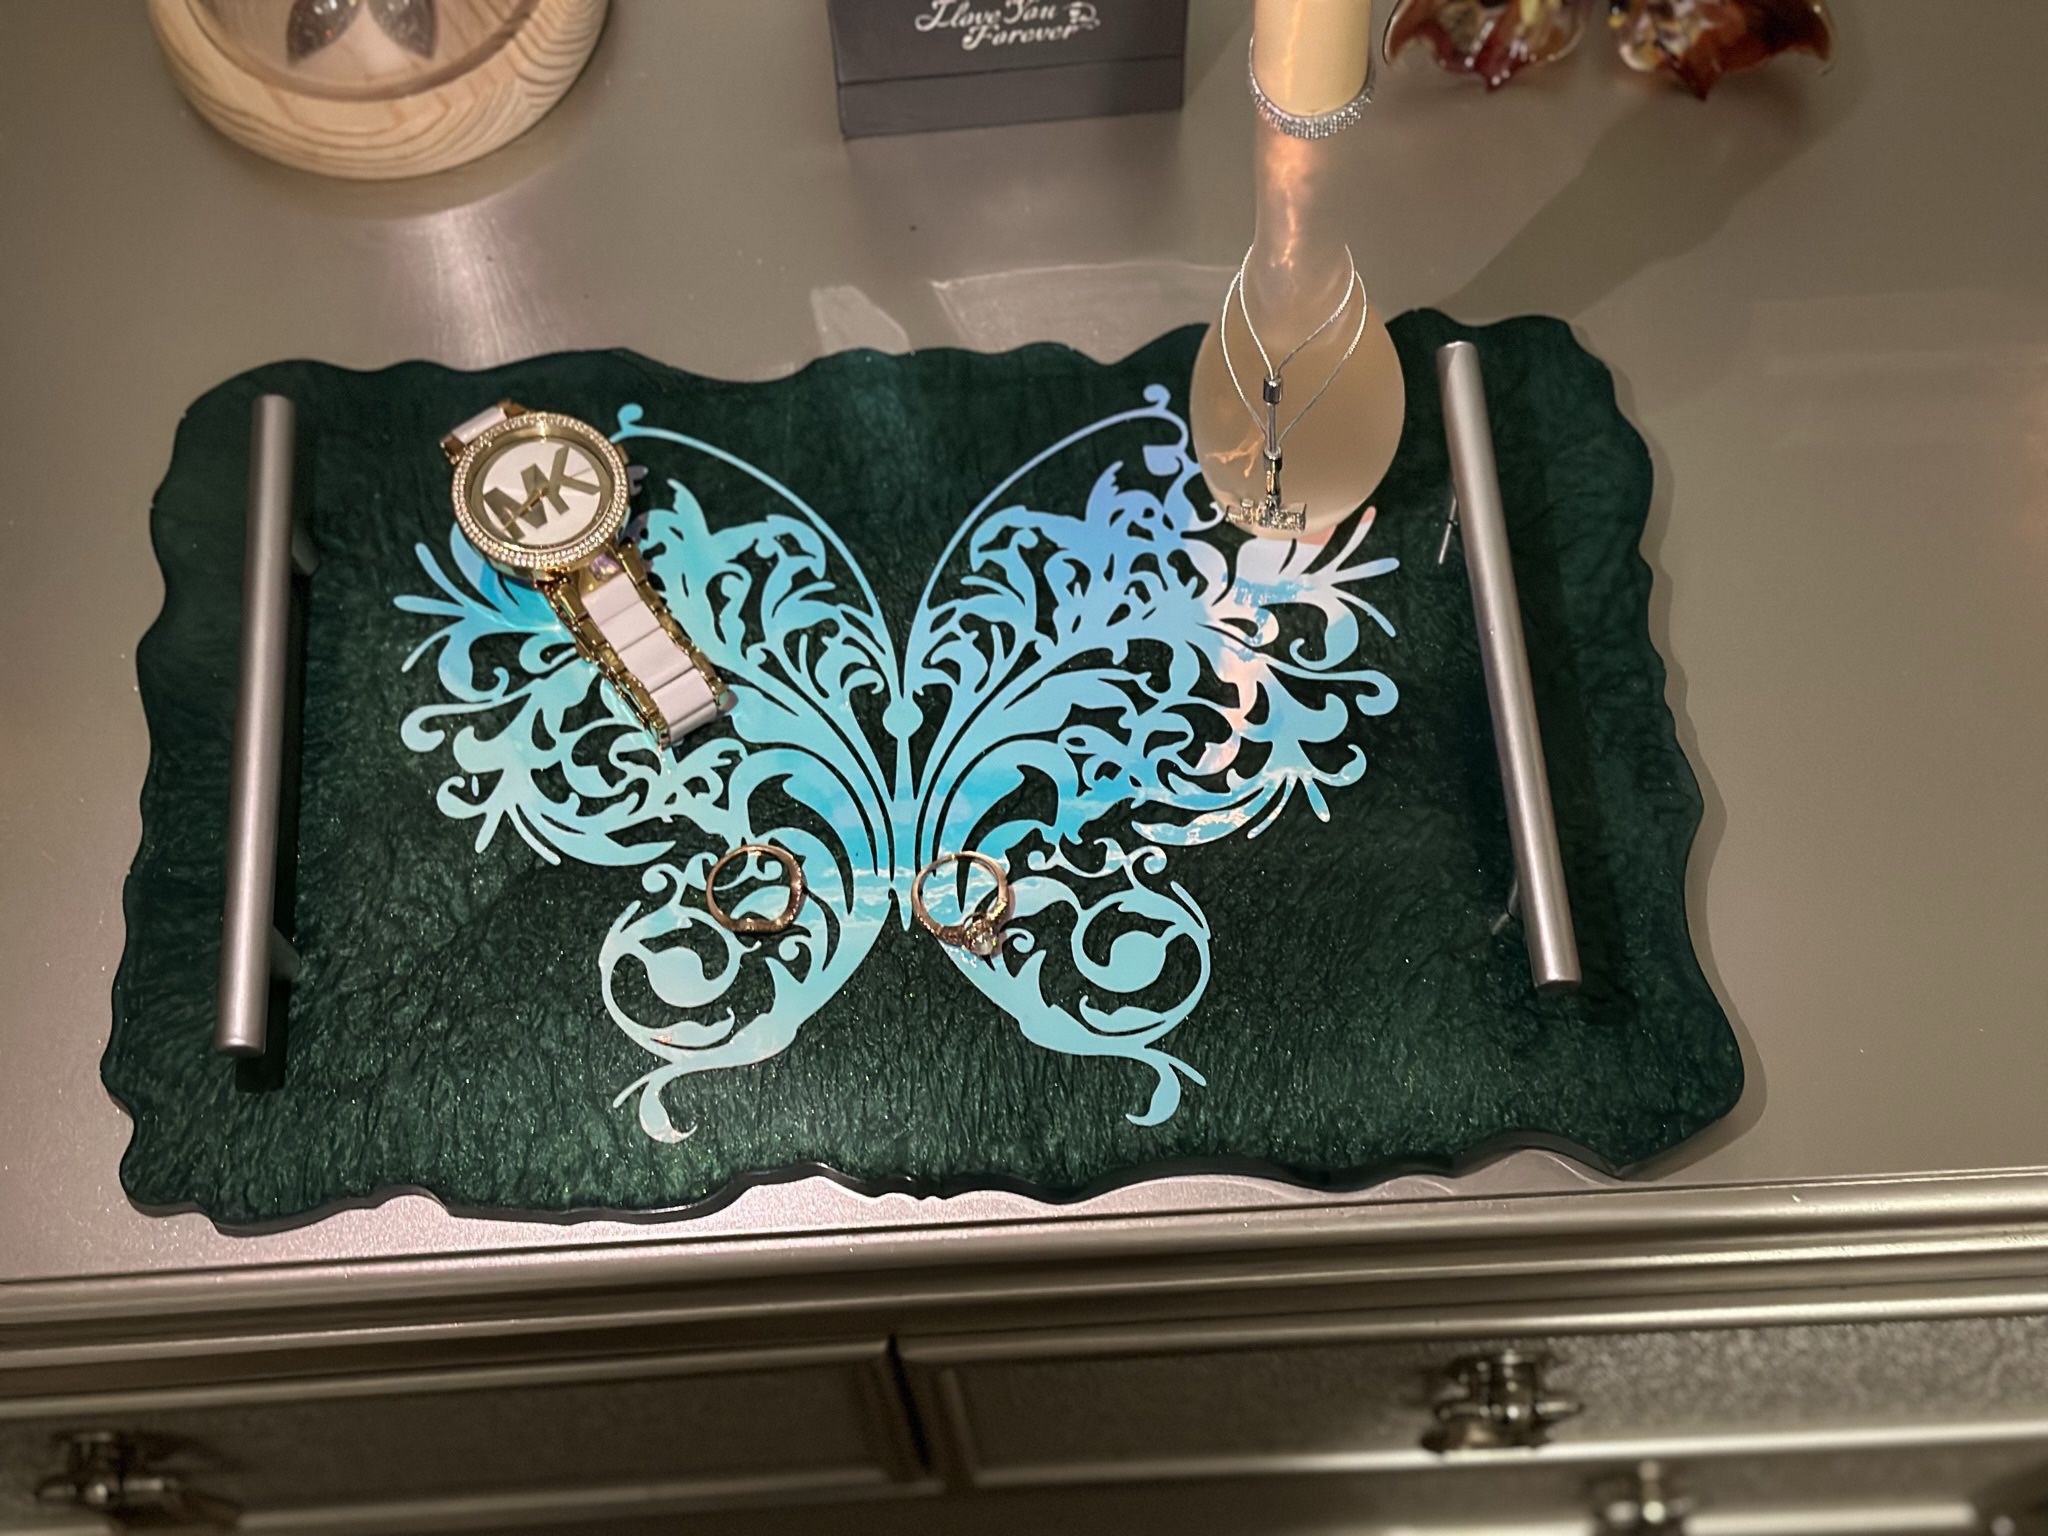 Teal Jewelry Tray 